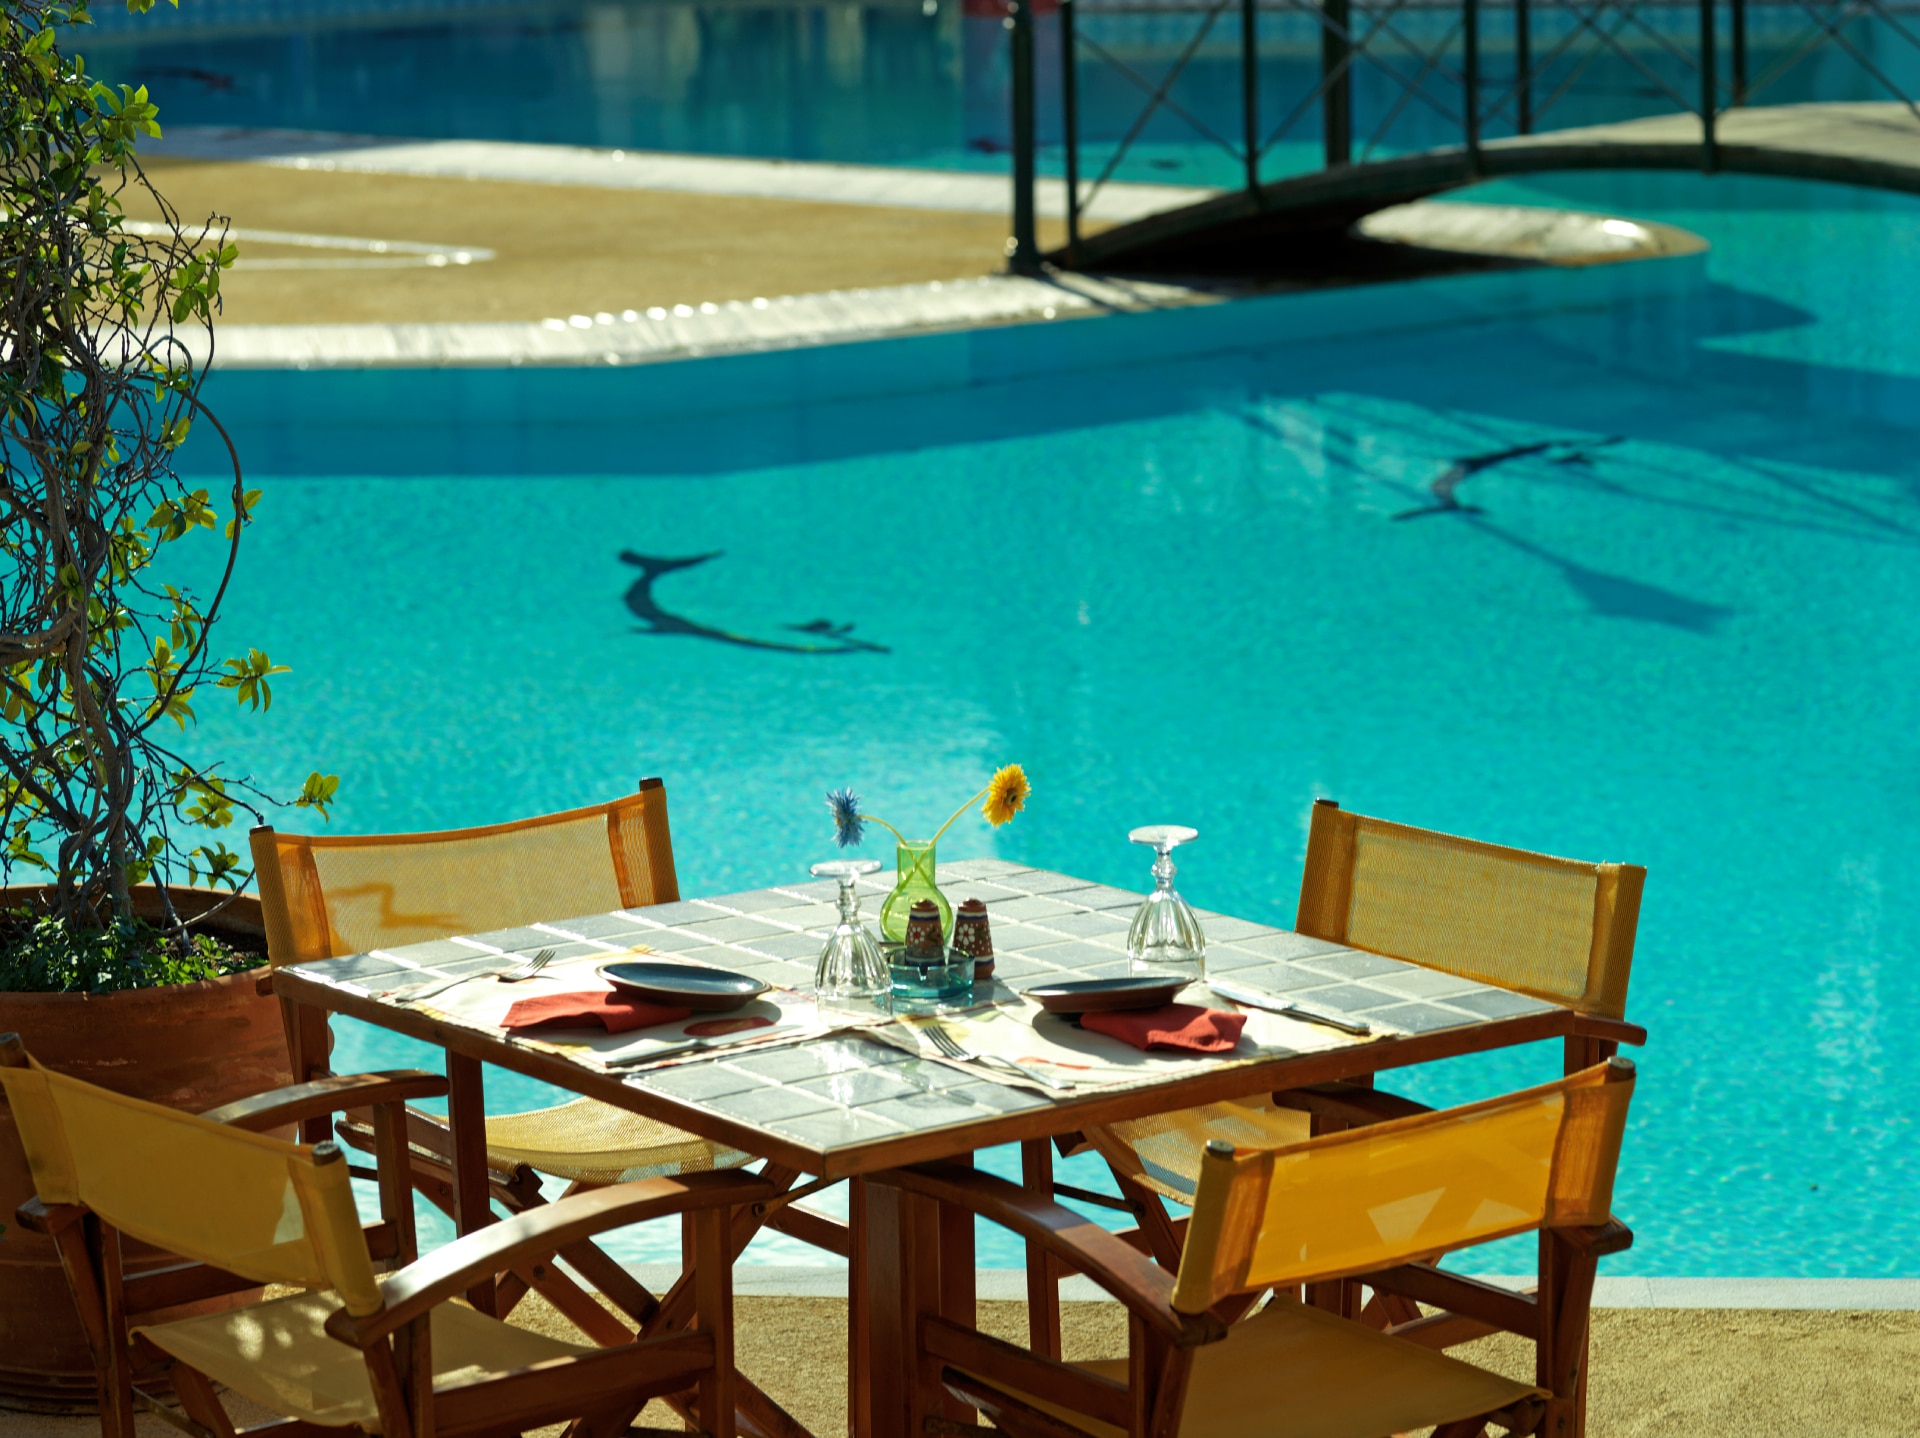 A beautifully arranged table in the outdoor poolside space of Maistros Pool restaurant